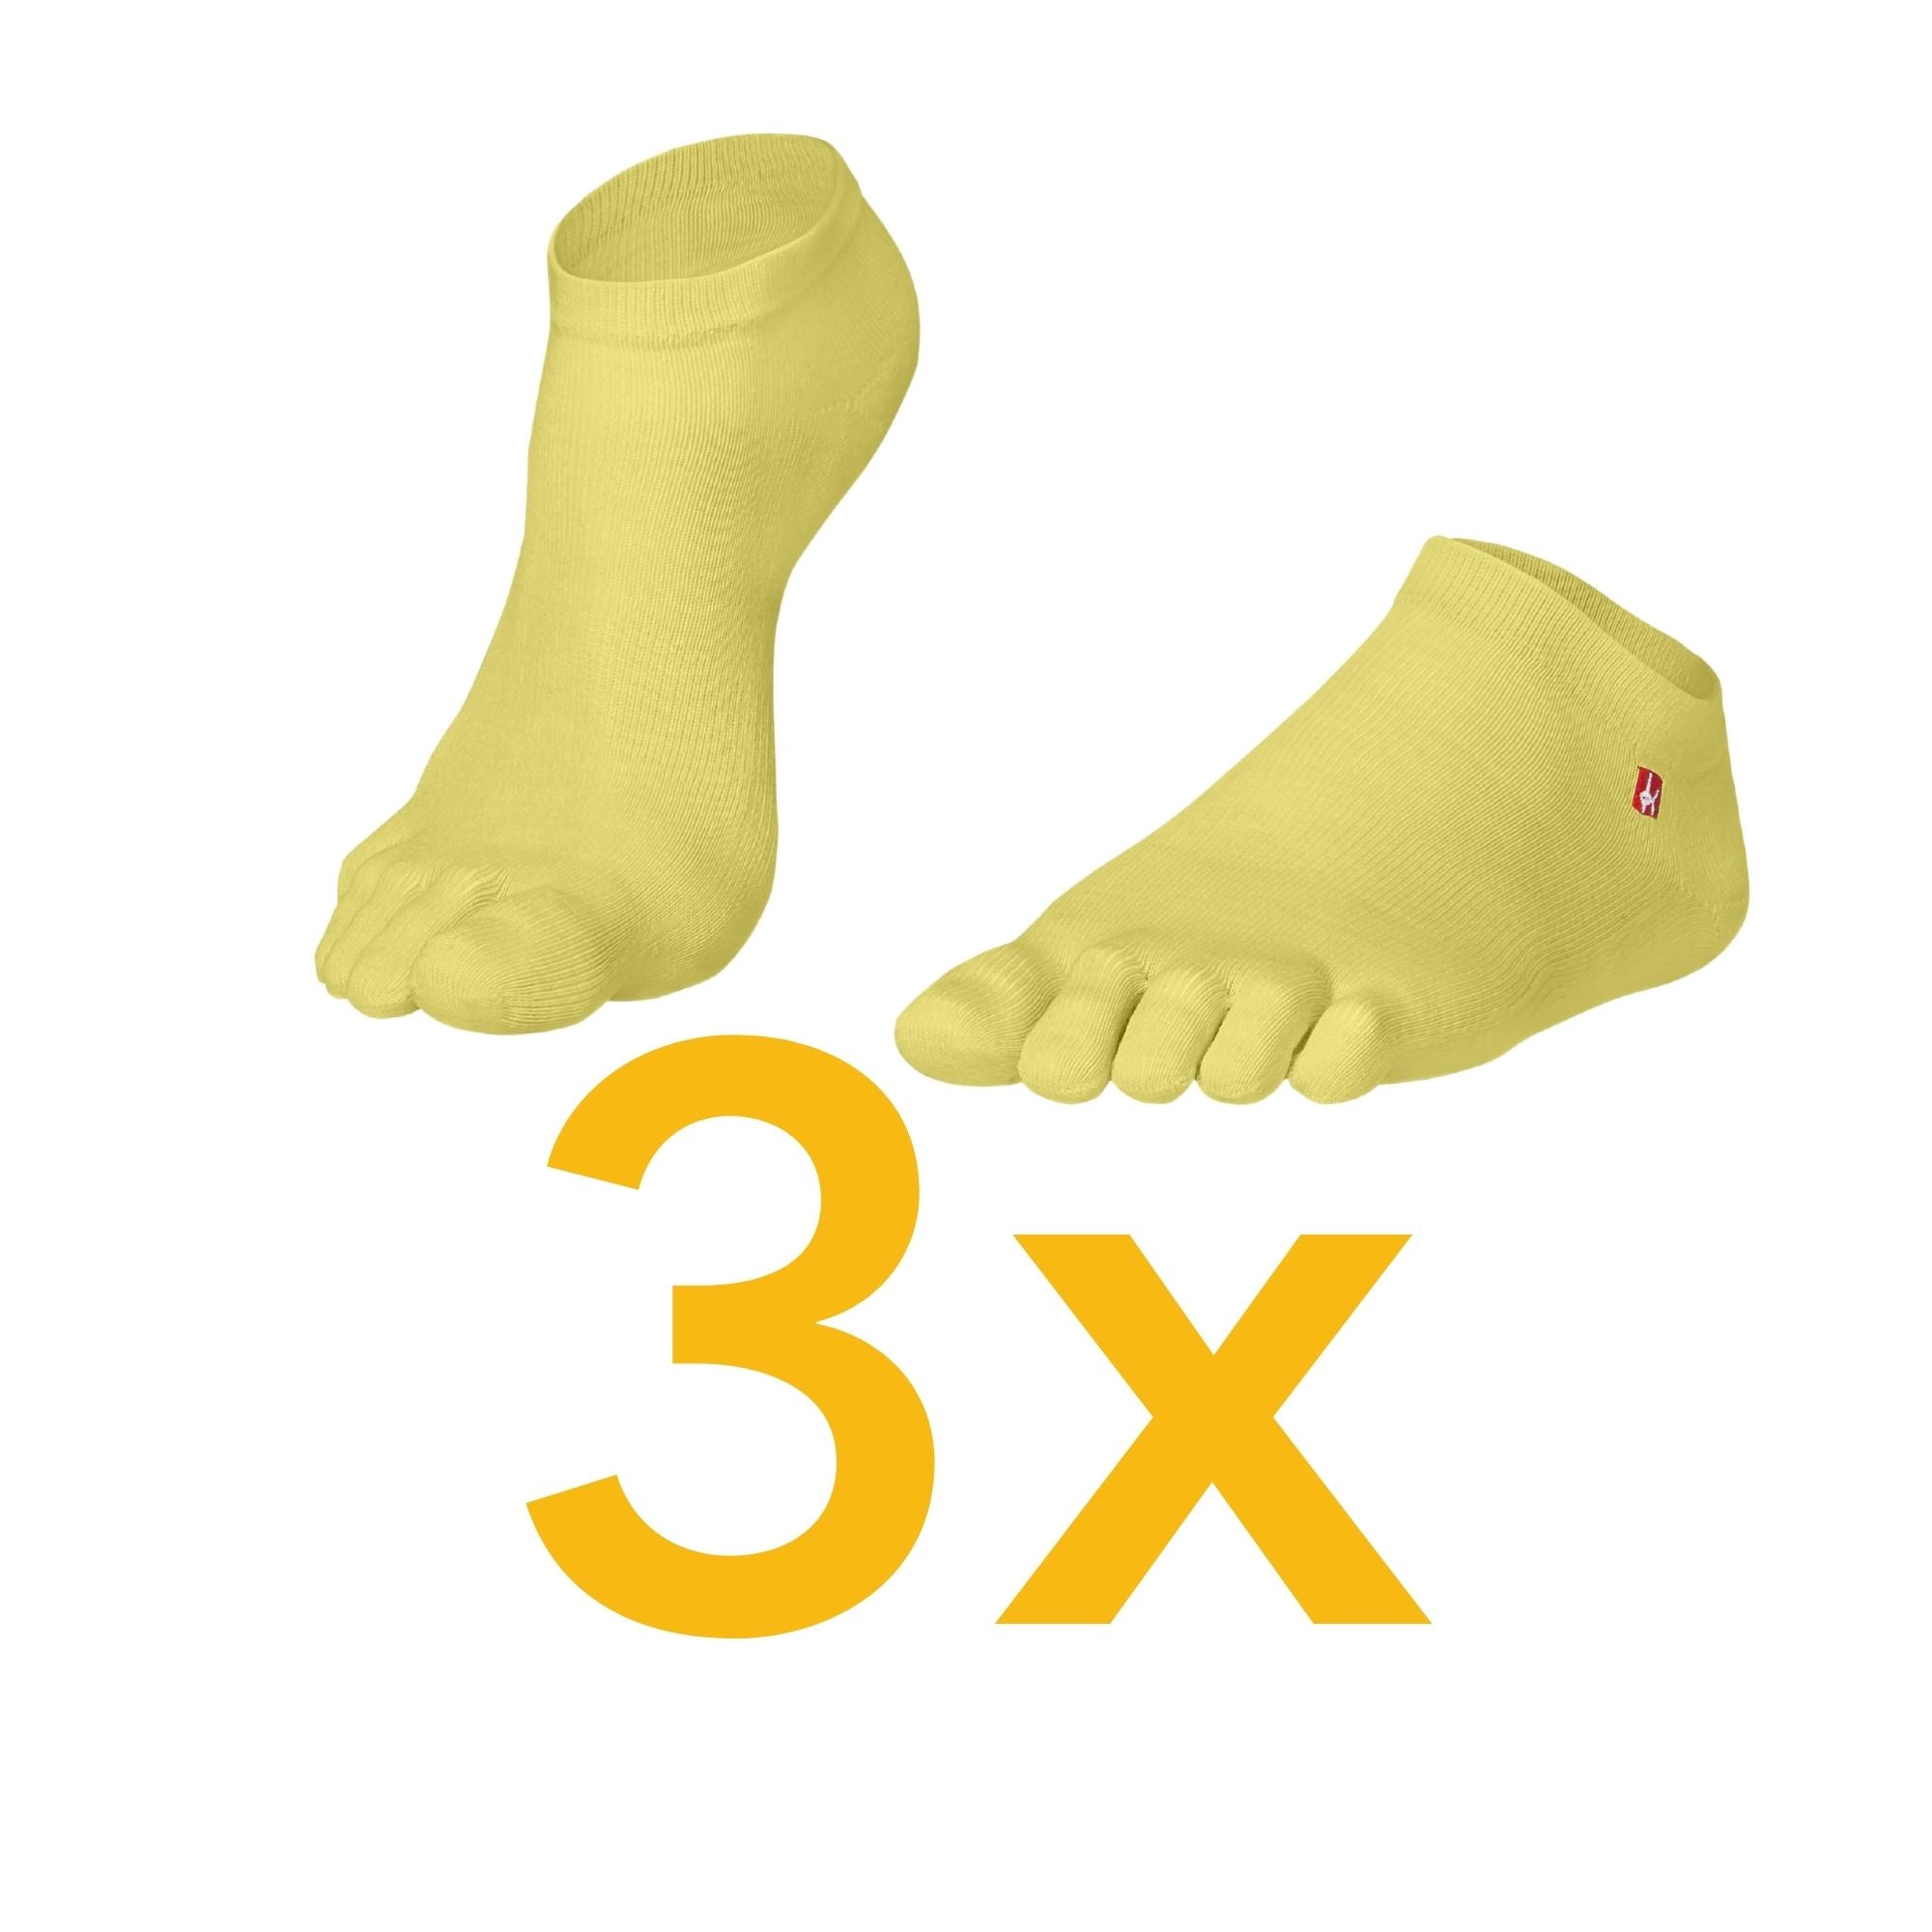 3-pack sports toe socks from Coolmax and cotton from Knitido in yellow